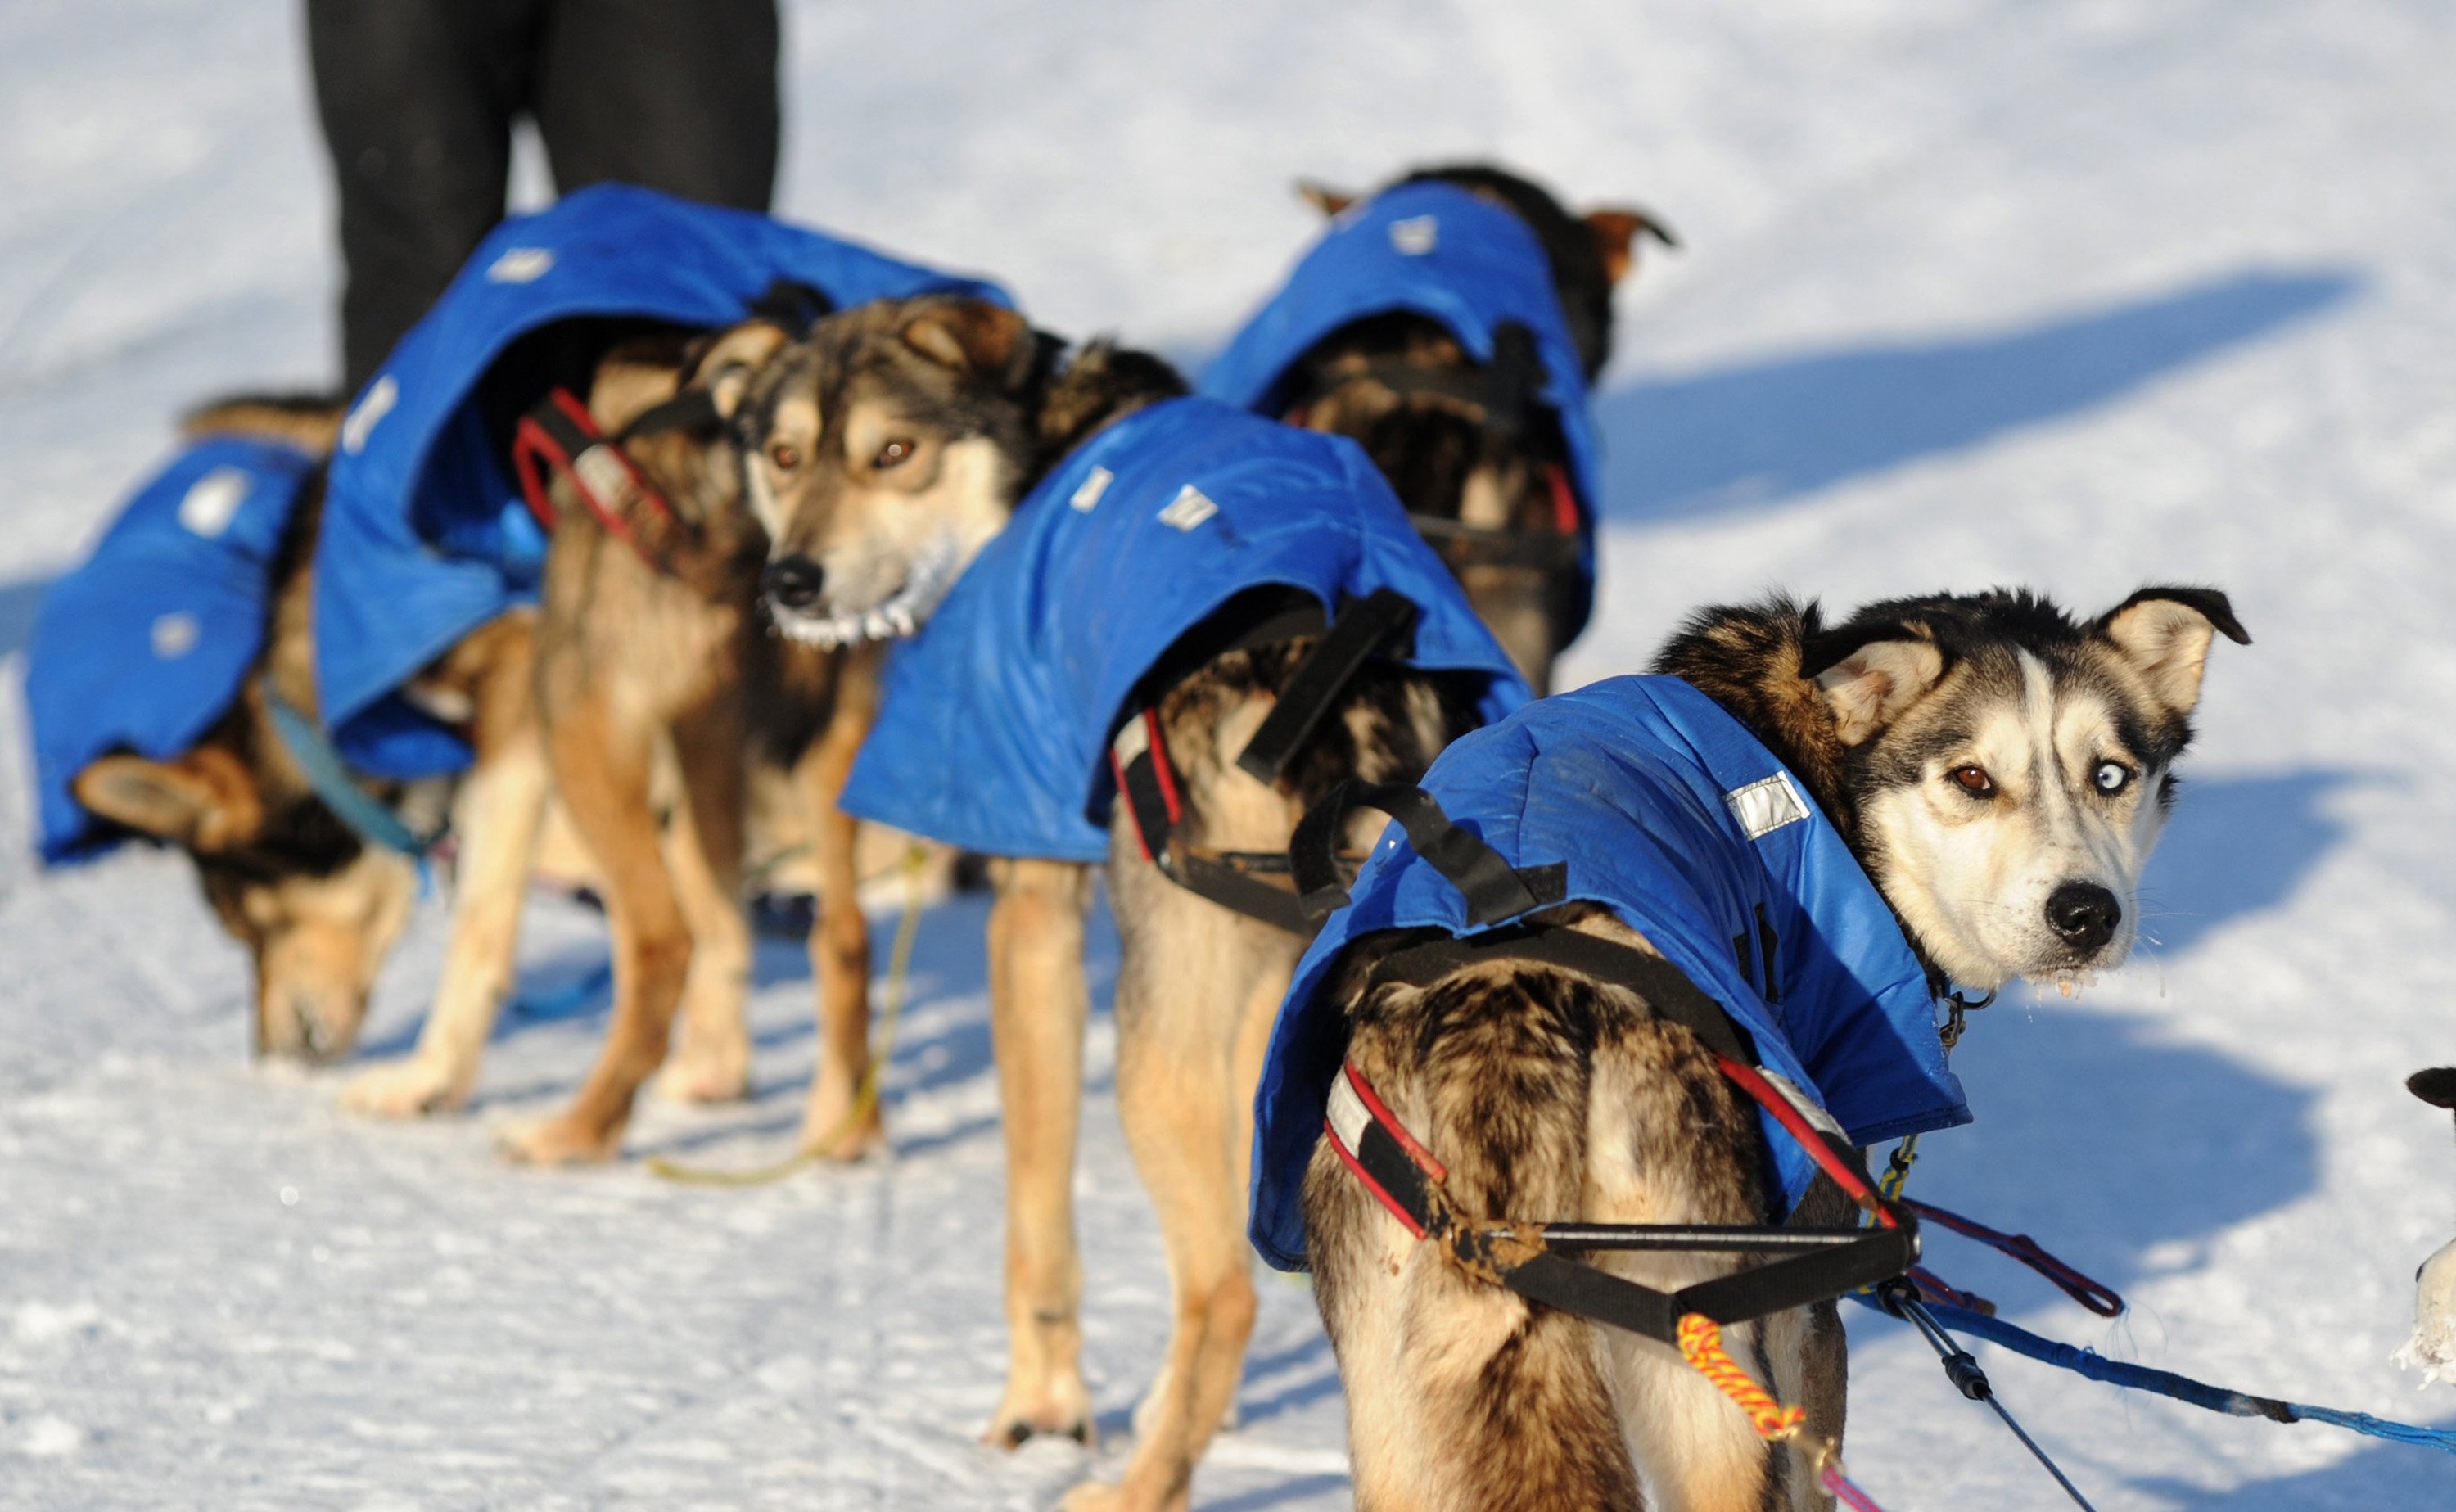 Mitch Seaveys dogs look back at the musher after they arrived at the White Mountain, Alaska, checkpoint during the Iditarod Trail Sled Dog Race on Monday, March 10, 2014. (Bob Hallinen/Anchorage Daily News&mdash;MCT/Getty Images)